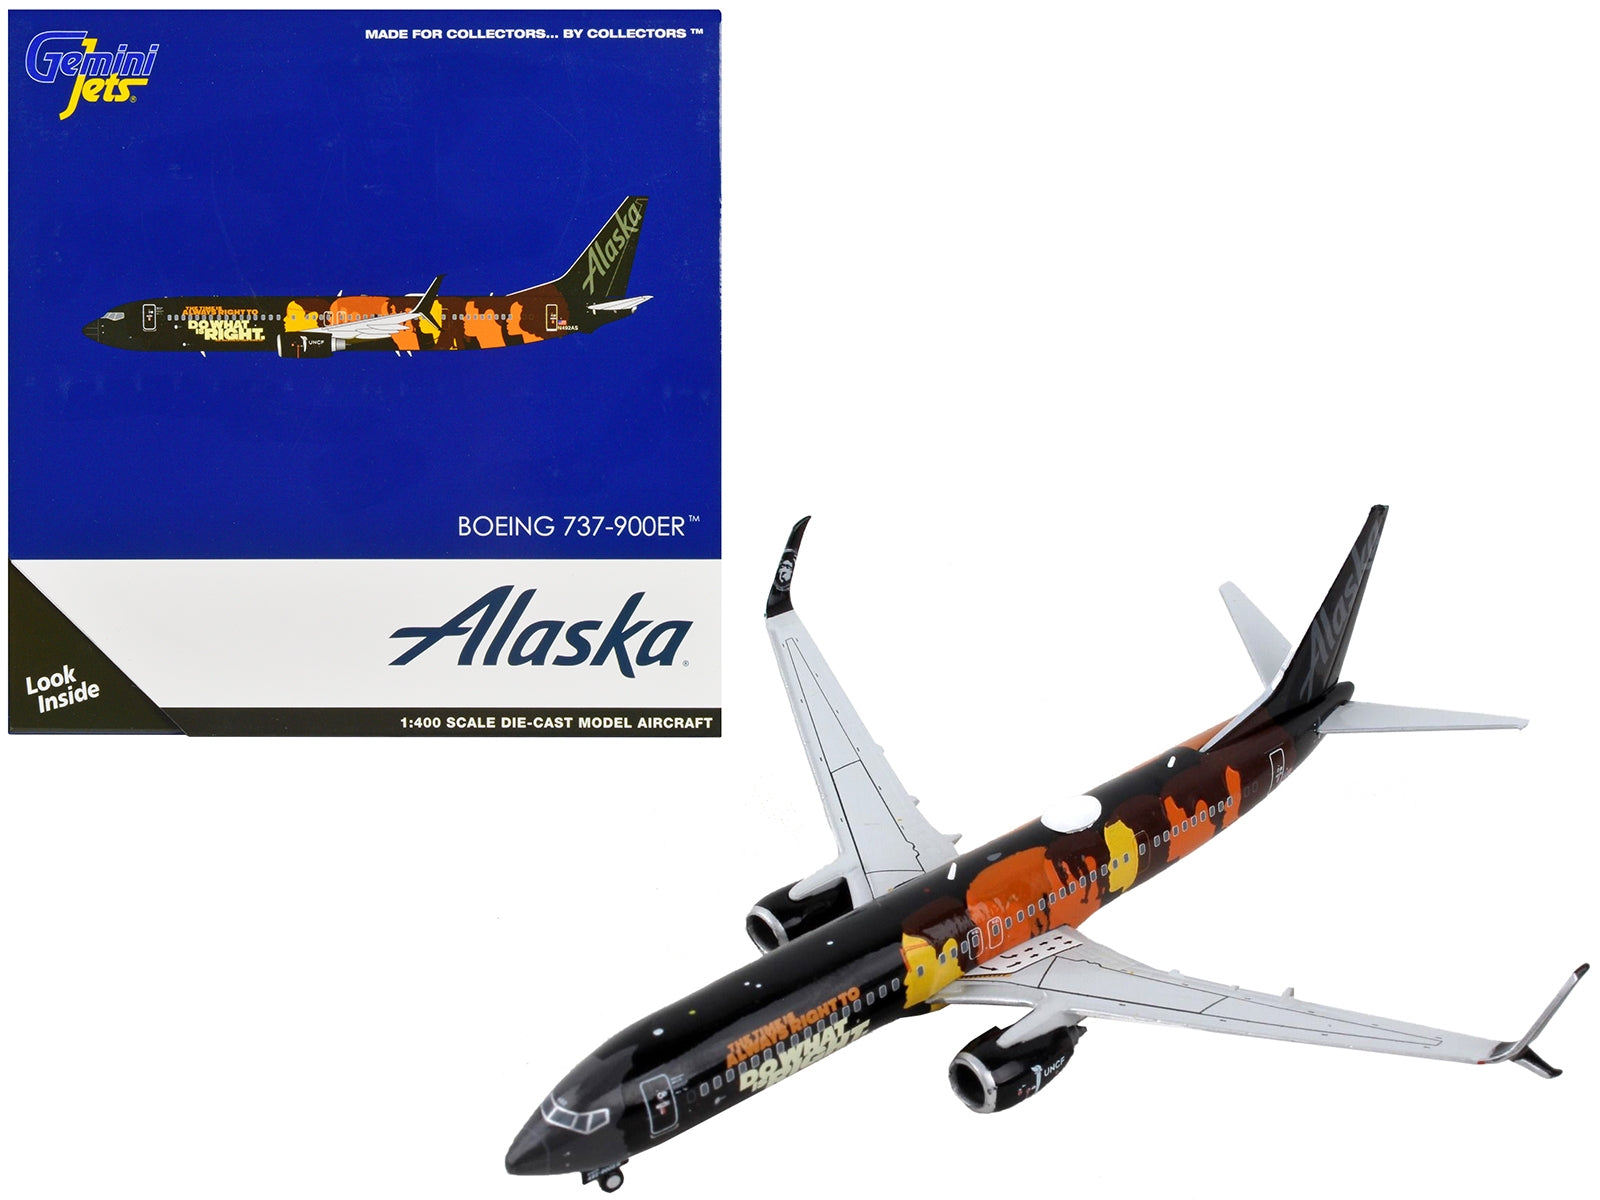 Boeing 737-900ER Commercial Aircraft "Alaska Airlines - Our Commitment Livery" Black with Graphics 1/400 Diecast Model Airplane by GeminiJets